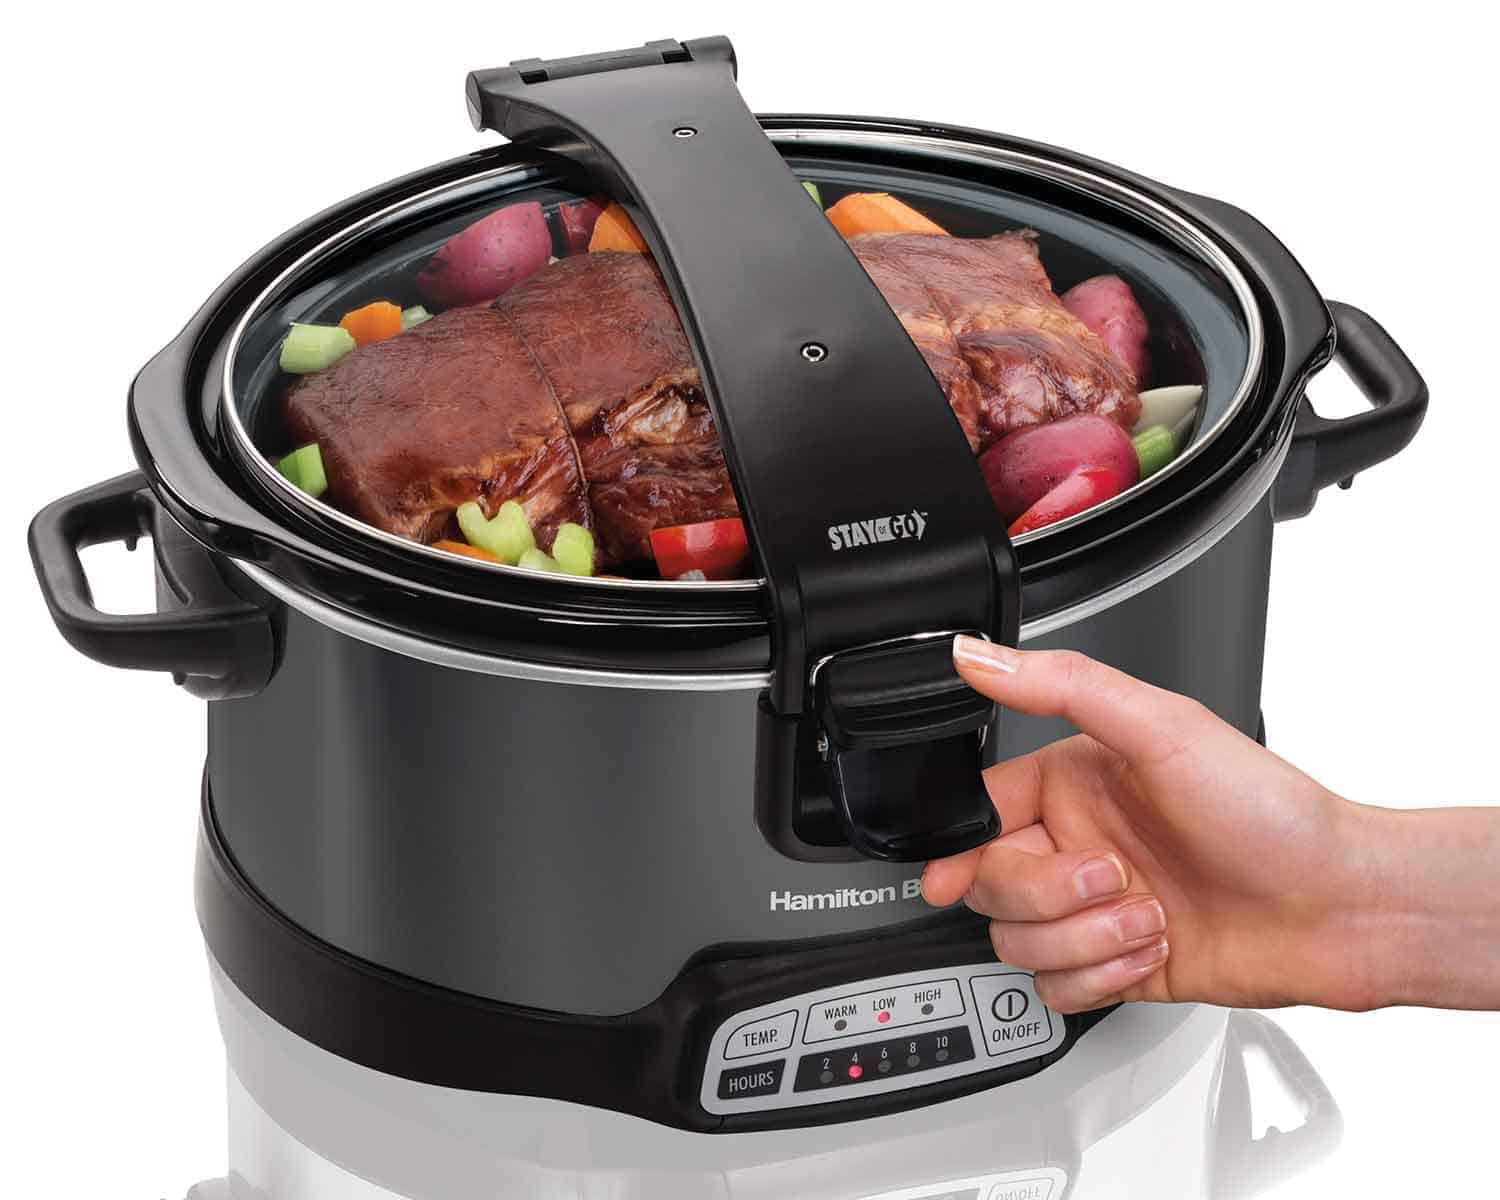 FREE Slow Cooker Cookbook from Hamilton Beach